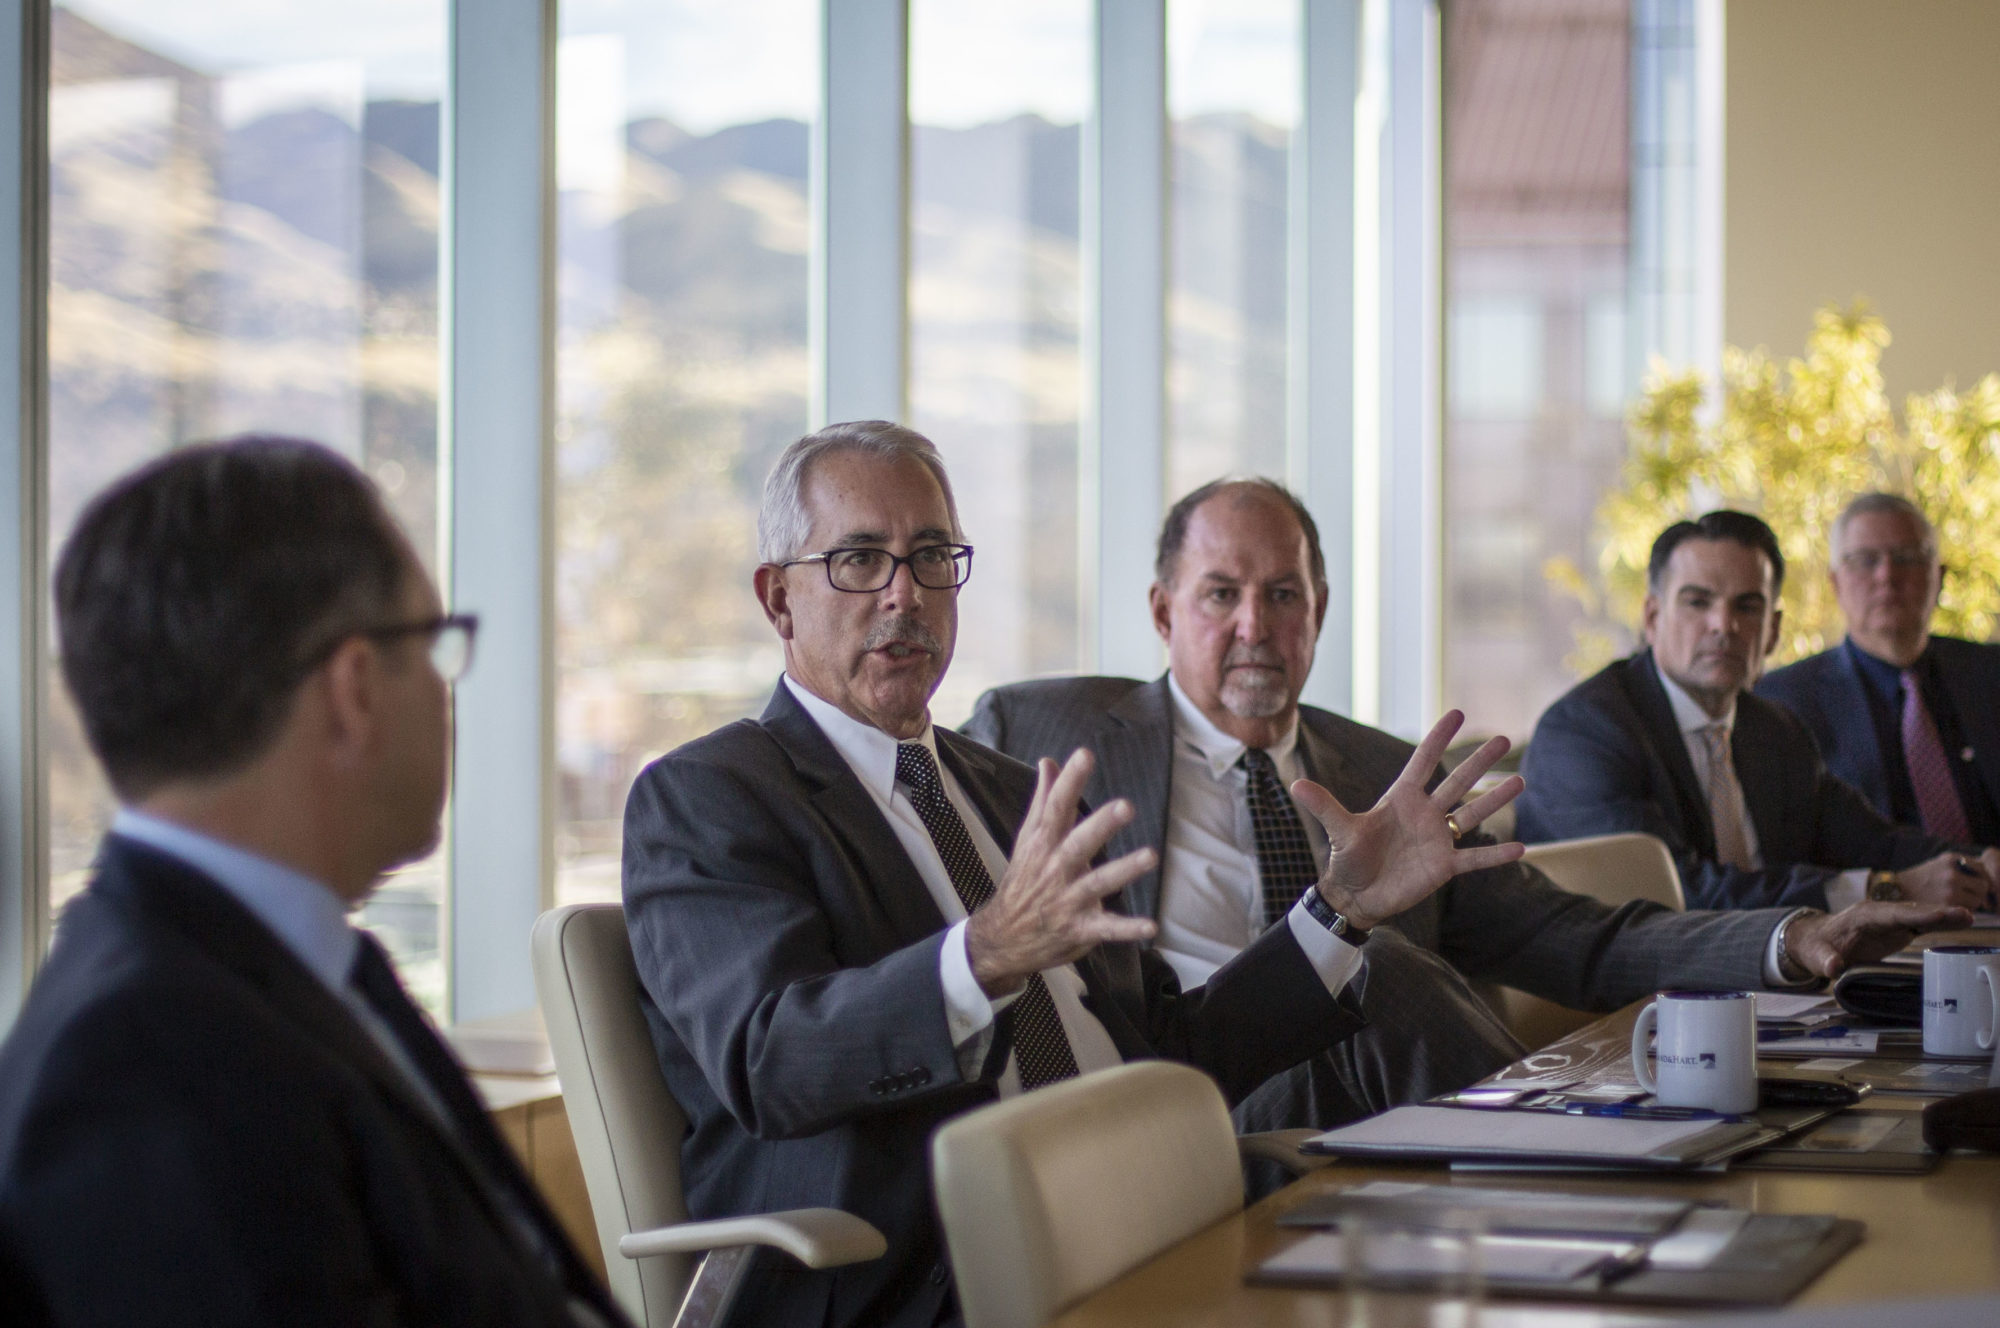 Our experts got together to discuss what's new this year in banking and finance.